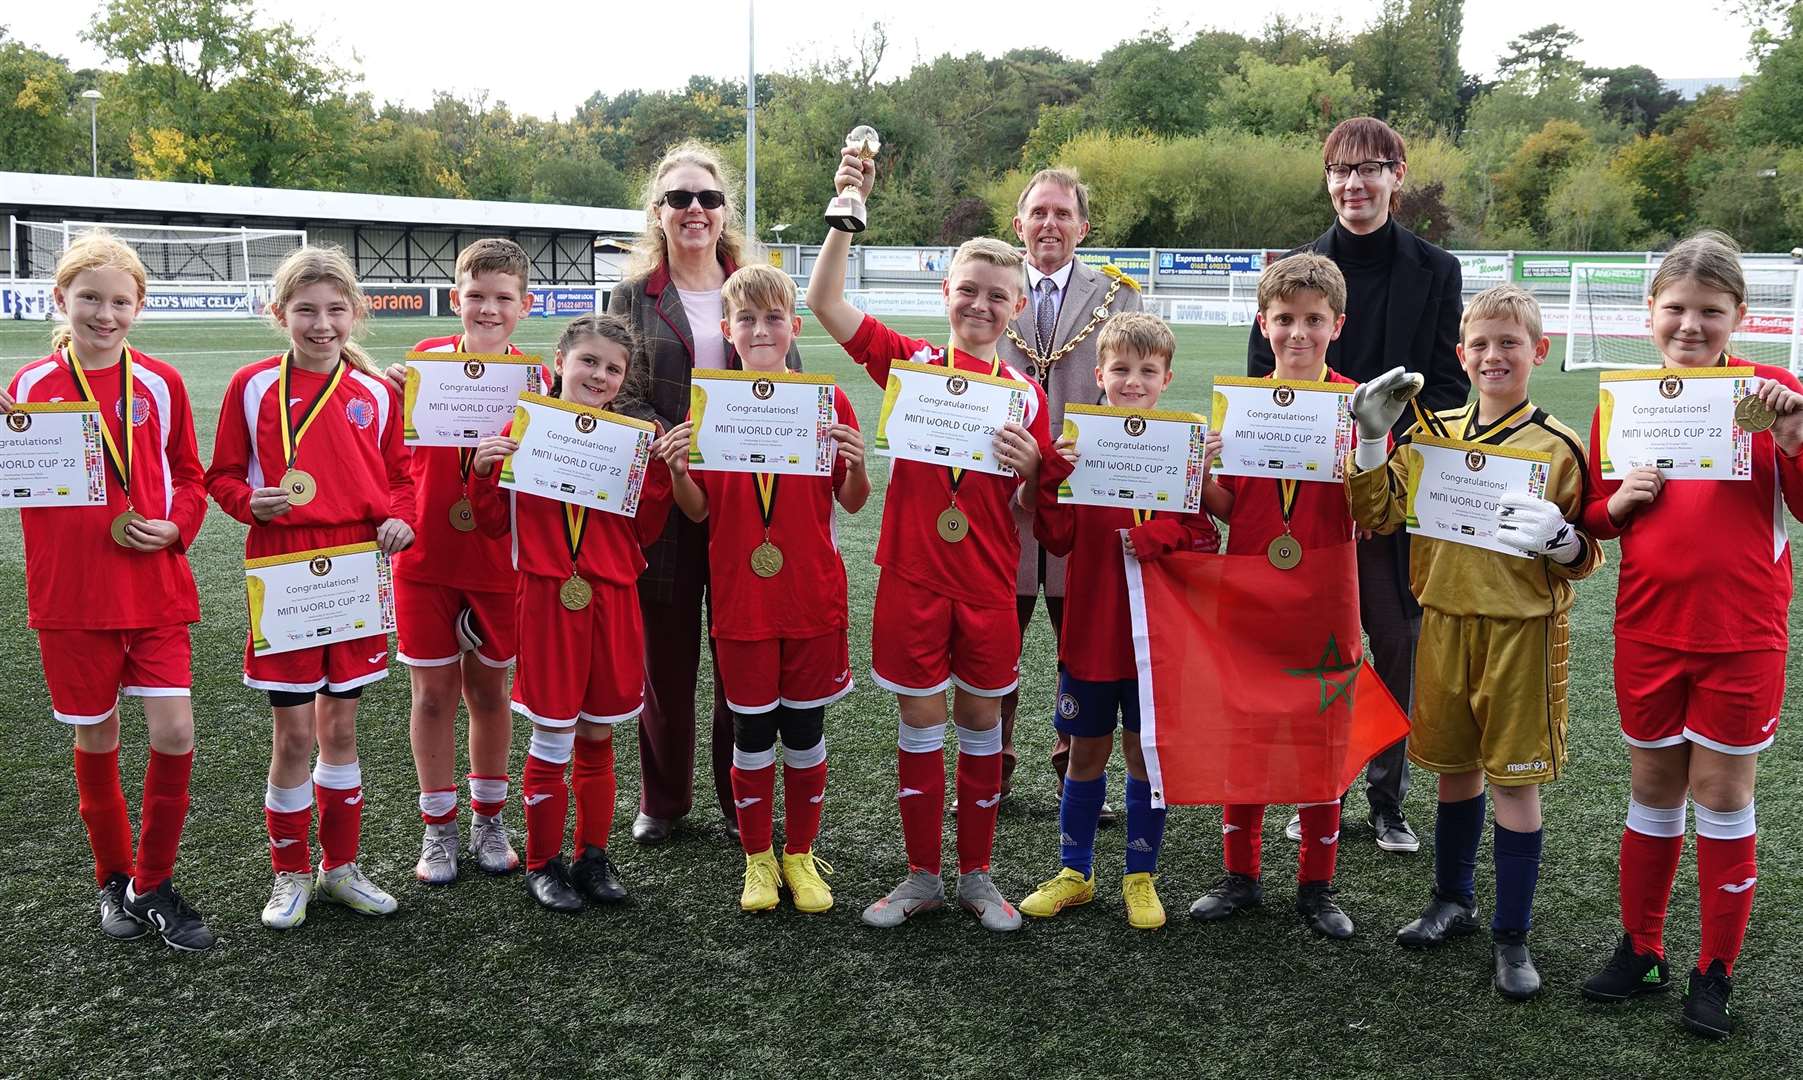 Discovery School youngsters, representing Morocco, are presented with the Mini World Cup. Picture: Ian Tucker